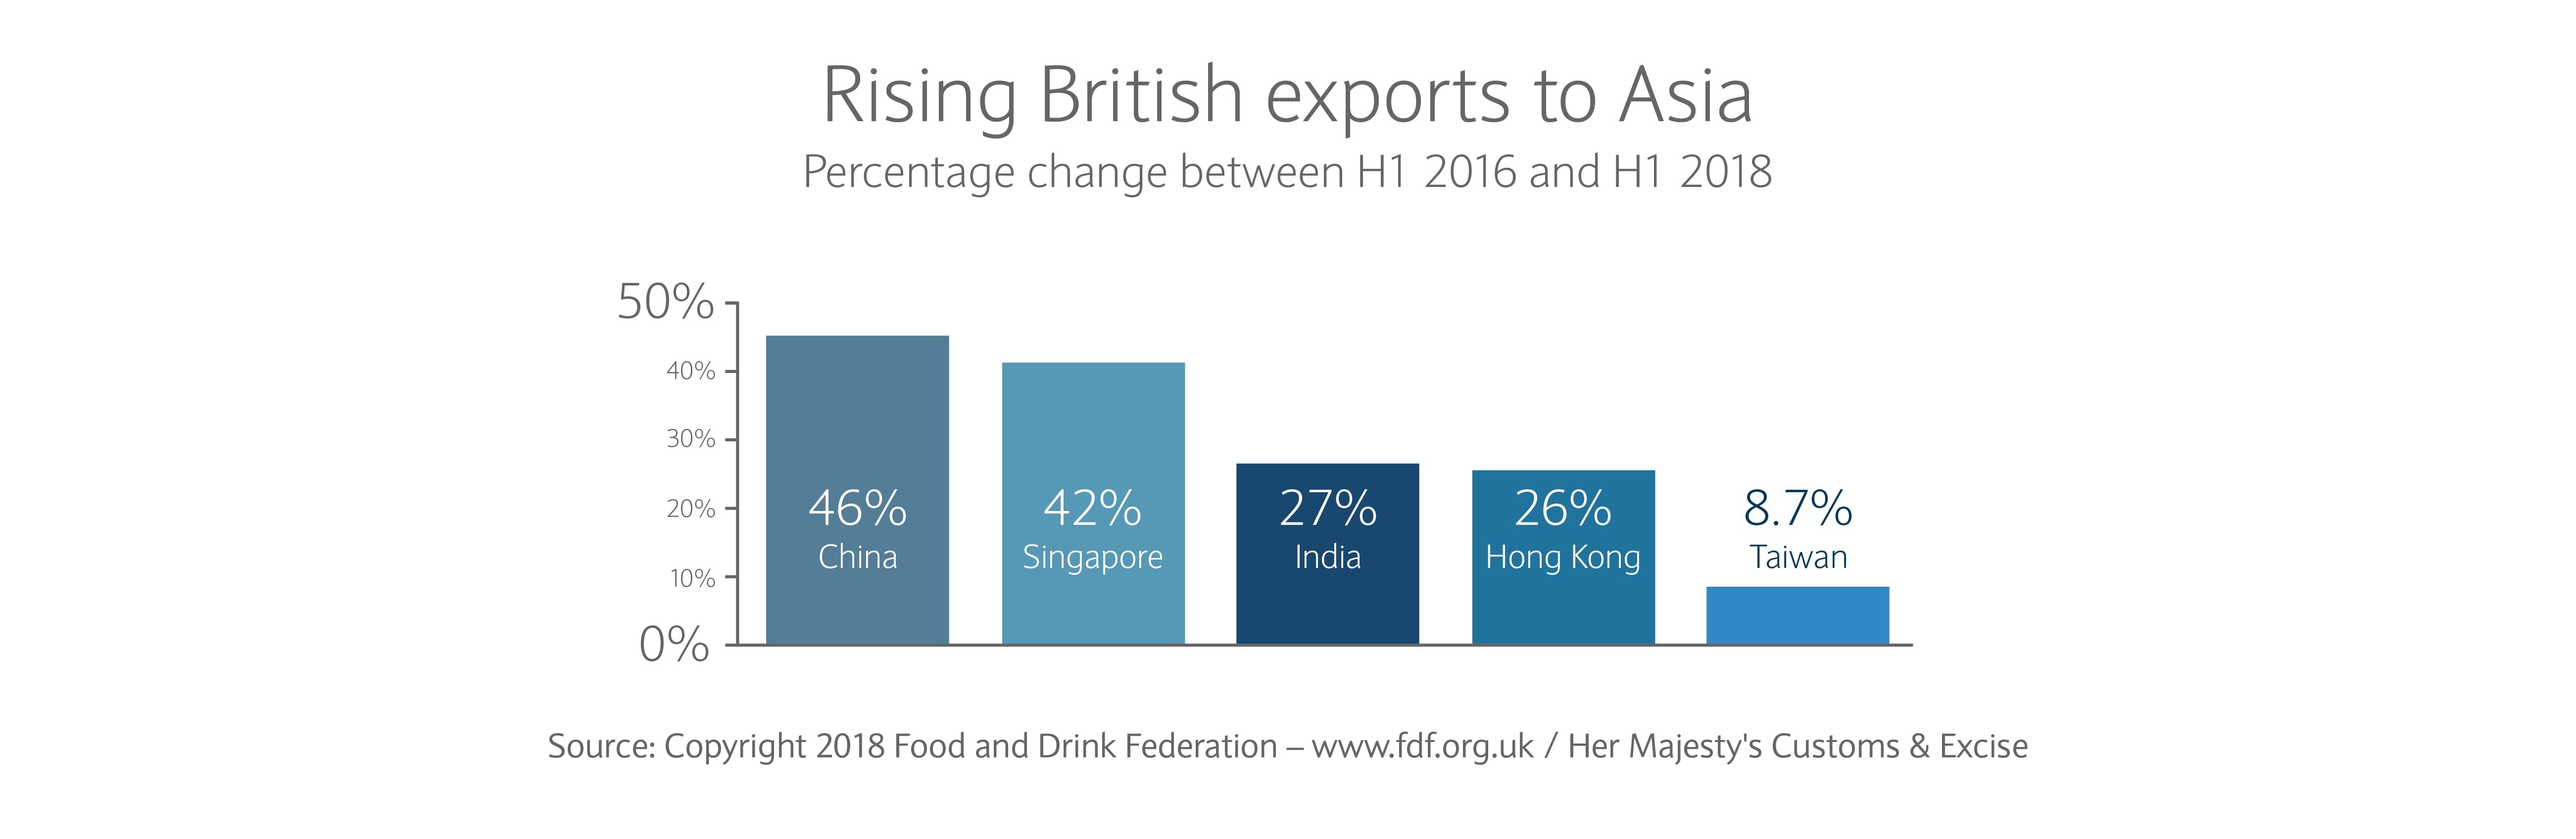 A graph showing the rise of British exports to Asia.